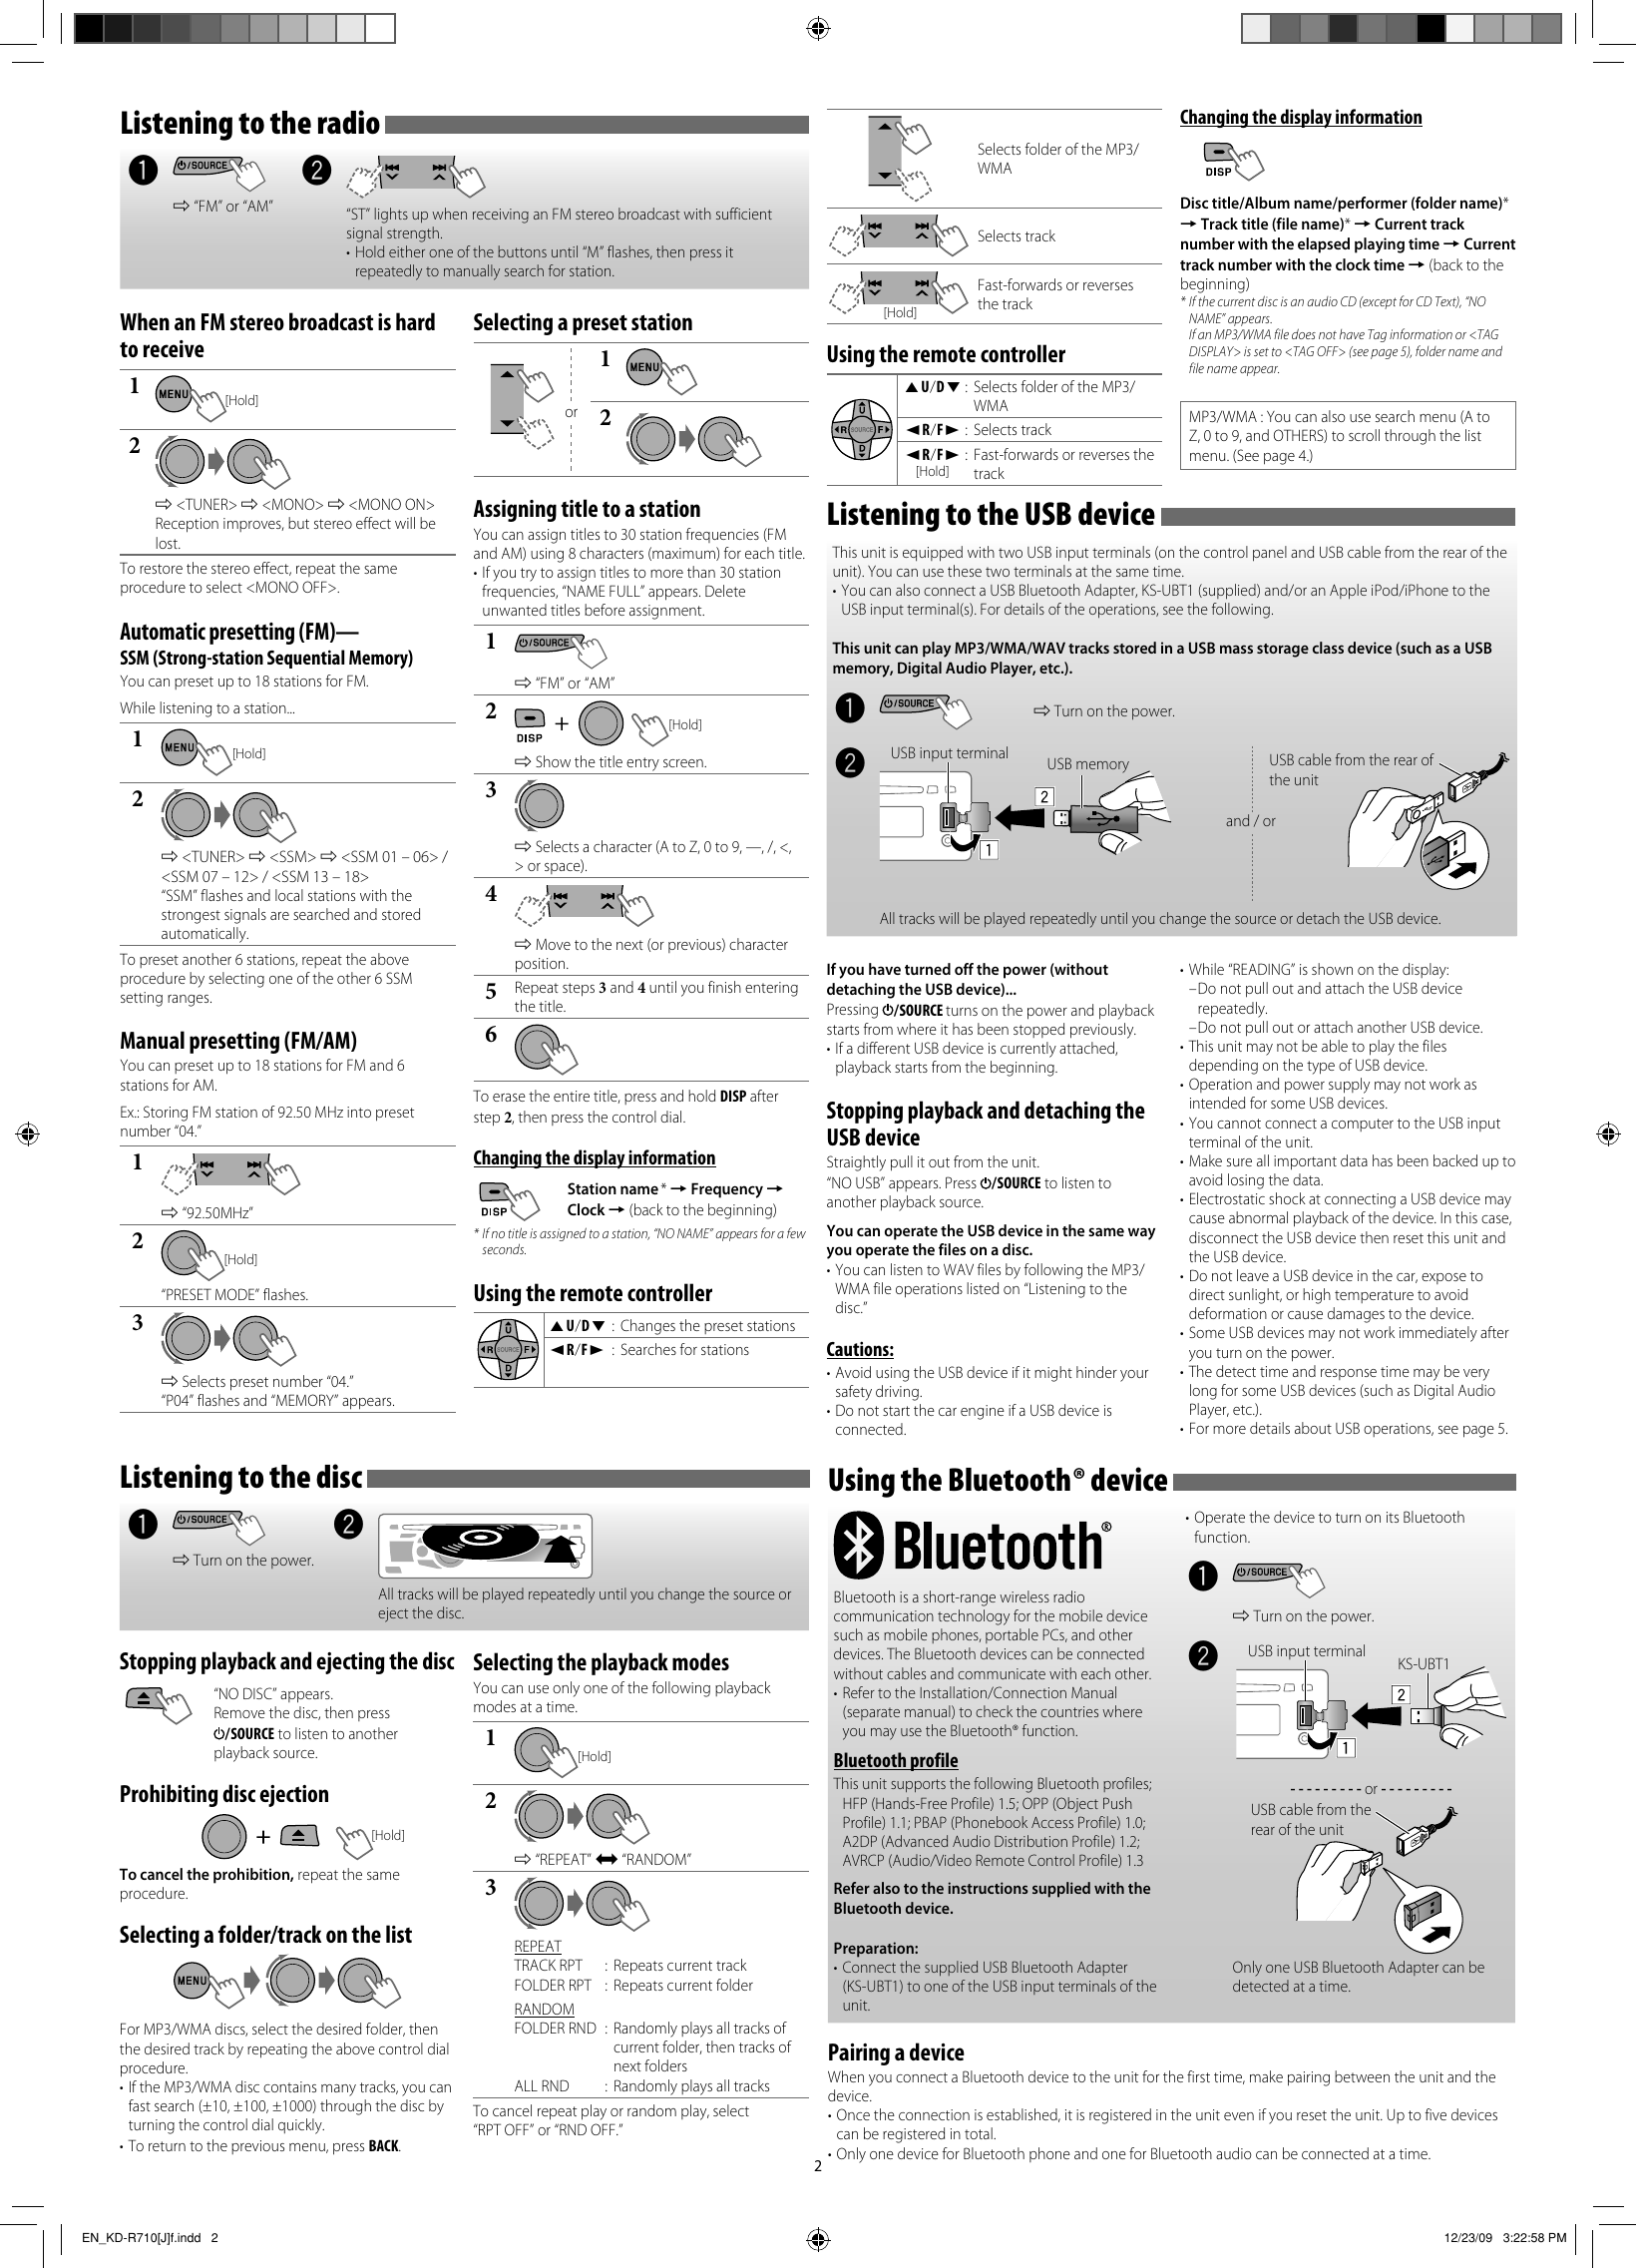 Page 2 of 8 - Jvc Jvc-Car-Stereo-System-Kd-R710-Users-Manual- EN_KD-R710[J]f  Jvc-car-stereo-system-kd-r710-users-manual